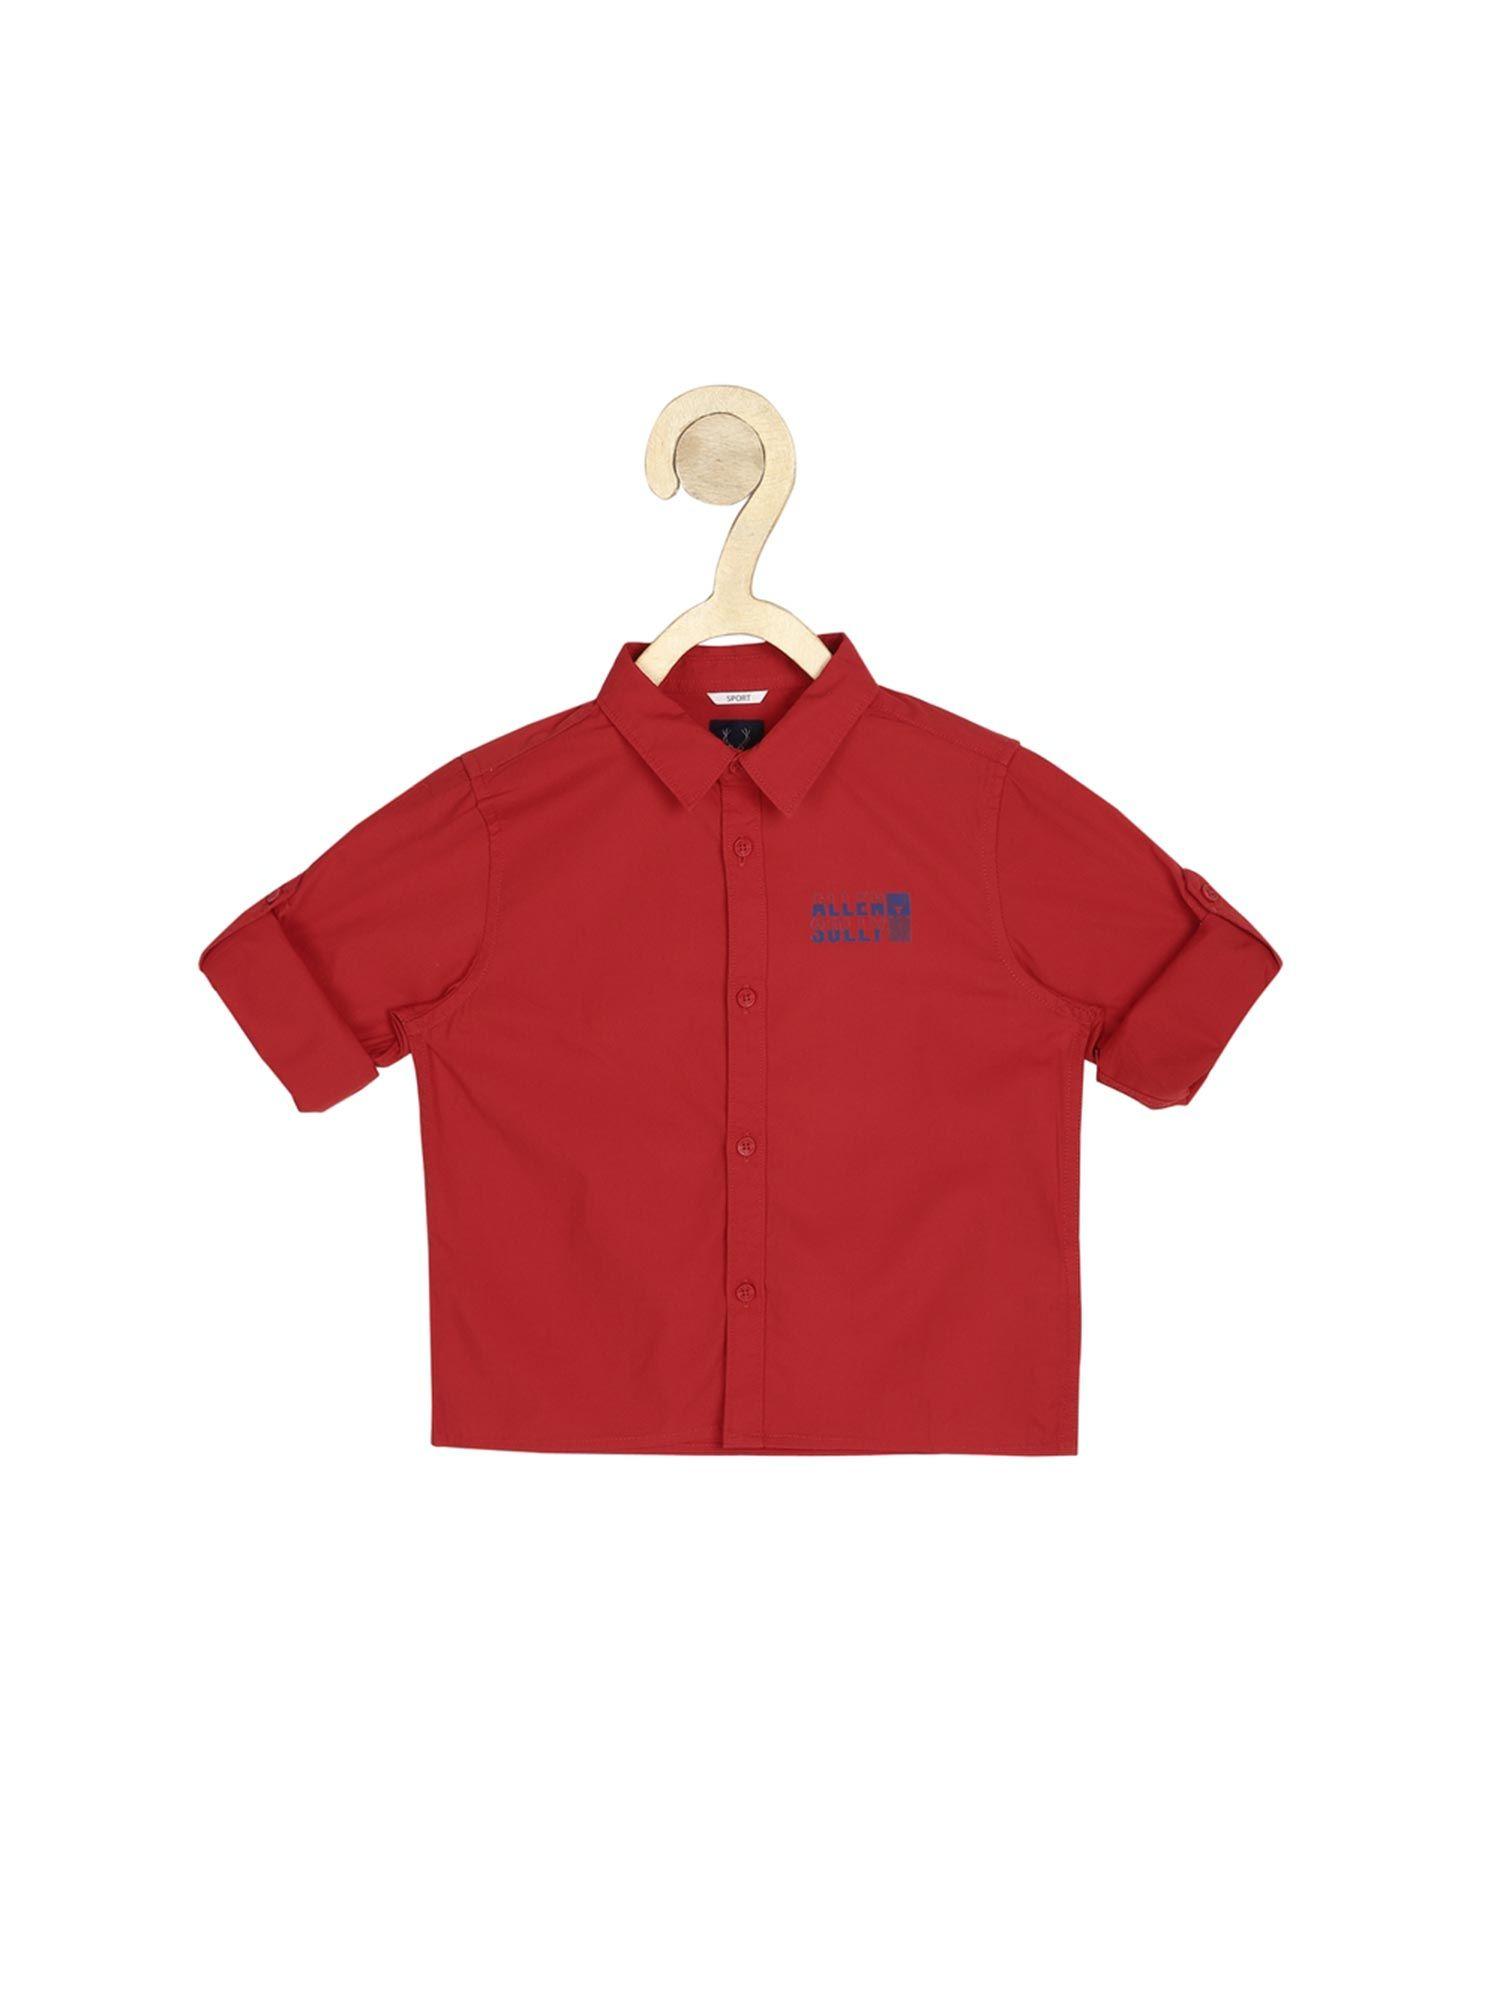 boys-red-solid-shirt